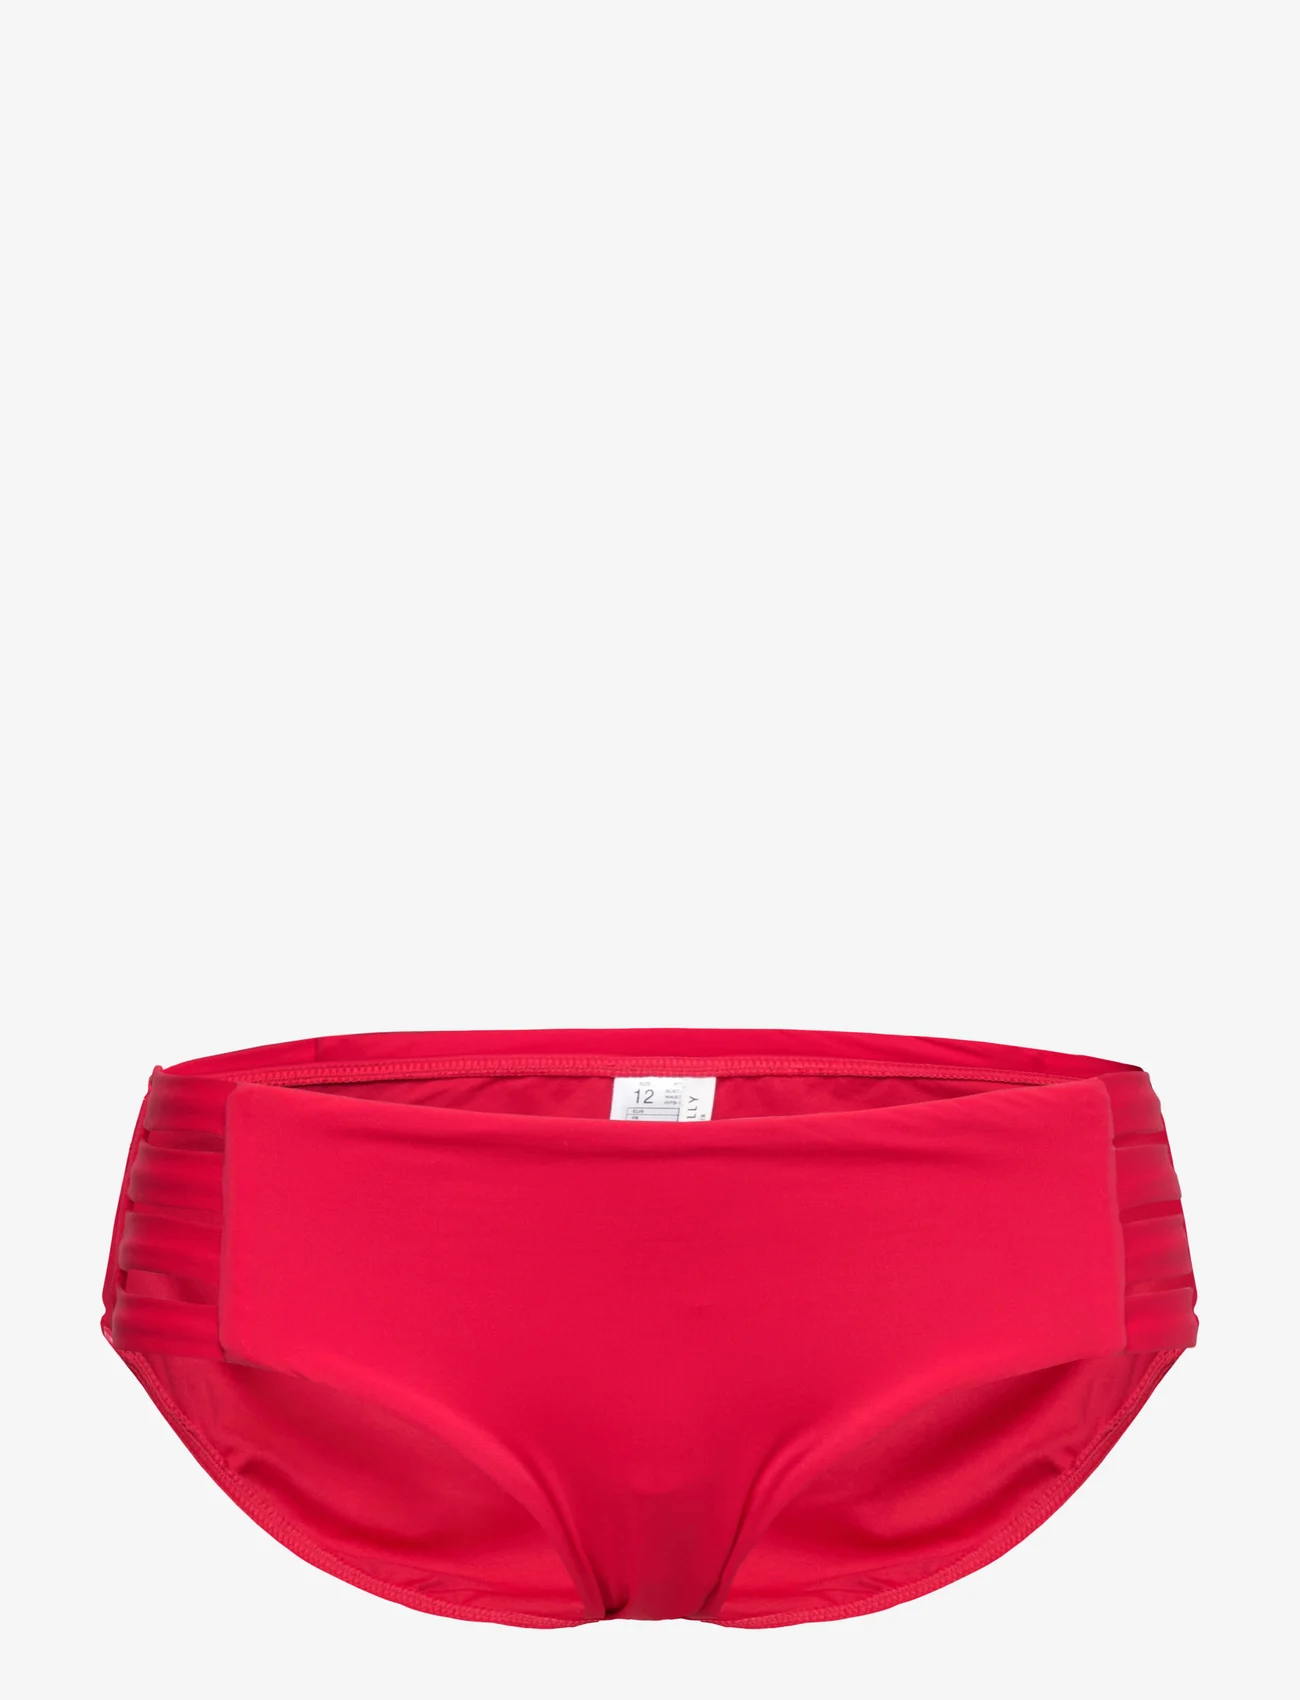 Seafolly - S.Collective Multi Strap Hipster Pant - bikinibriefs - chilli red - 0